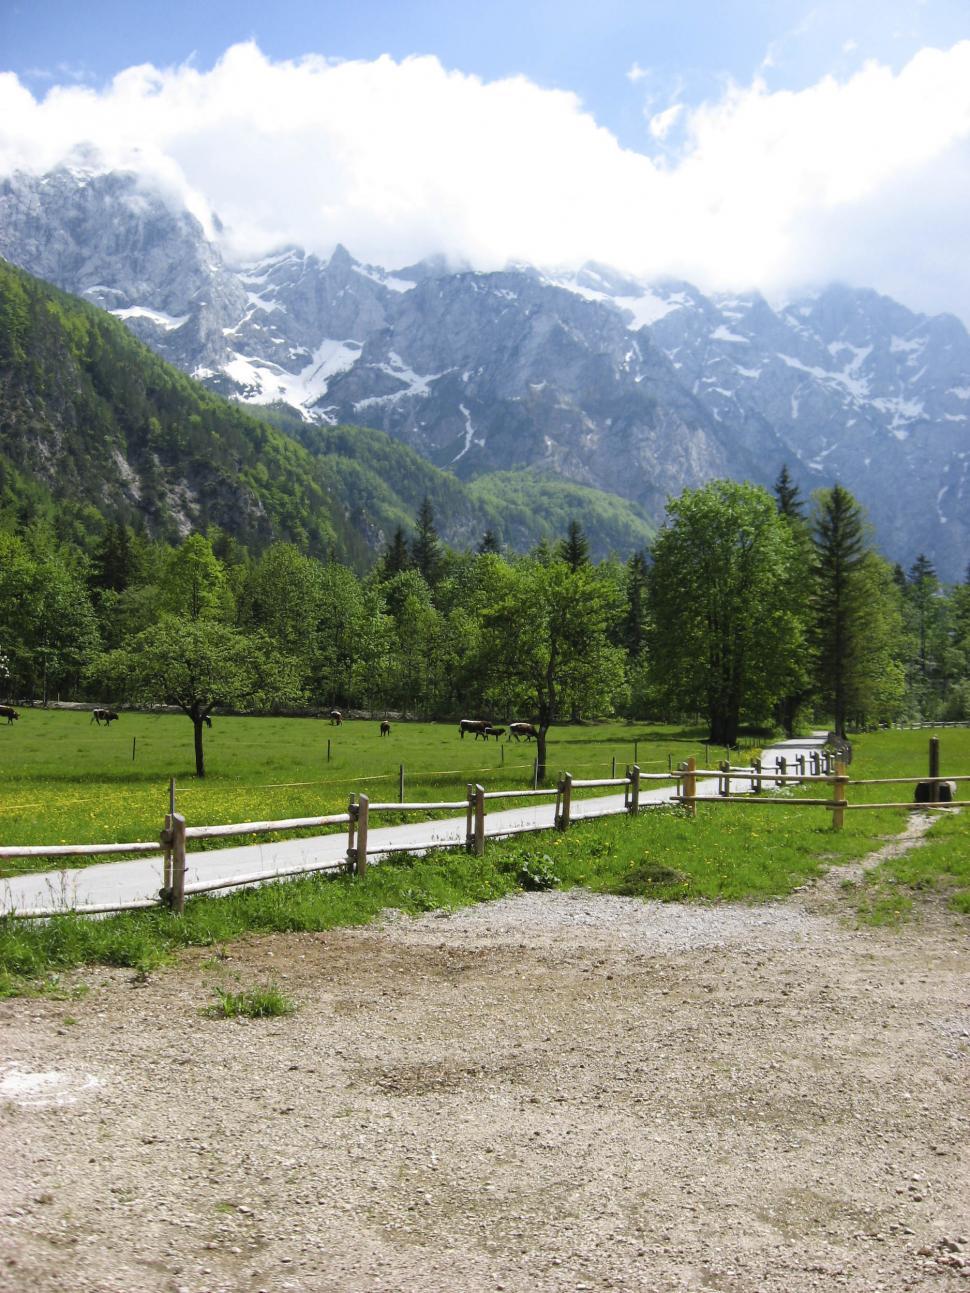 Free Image of Alps and road 